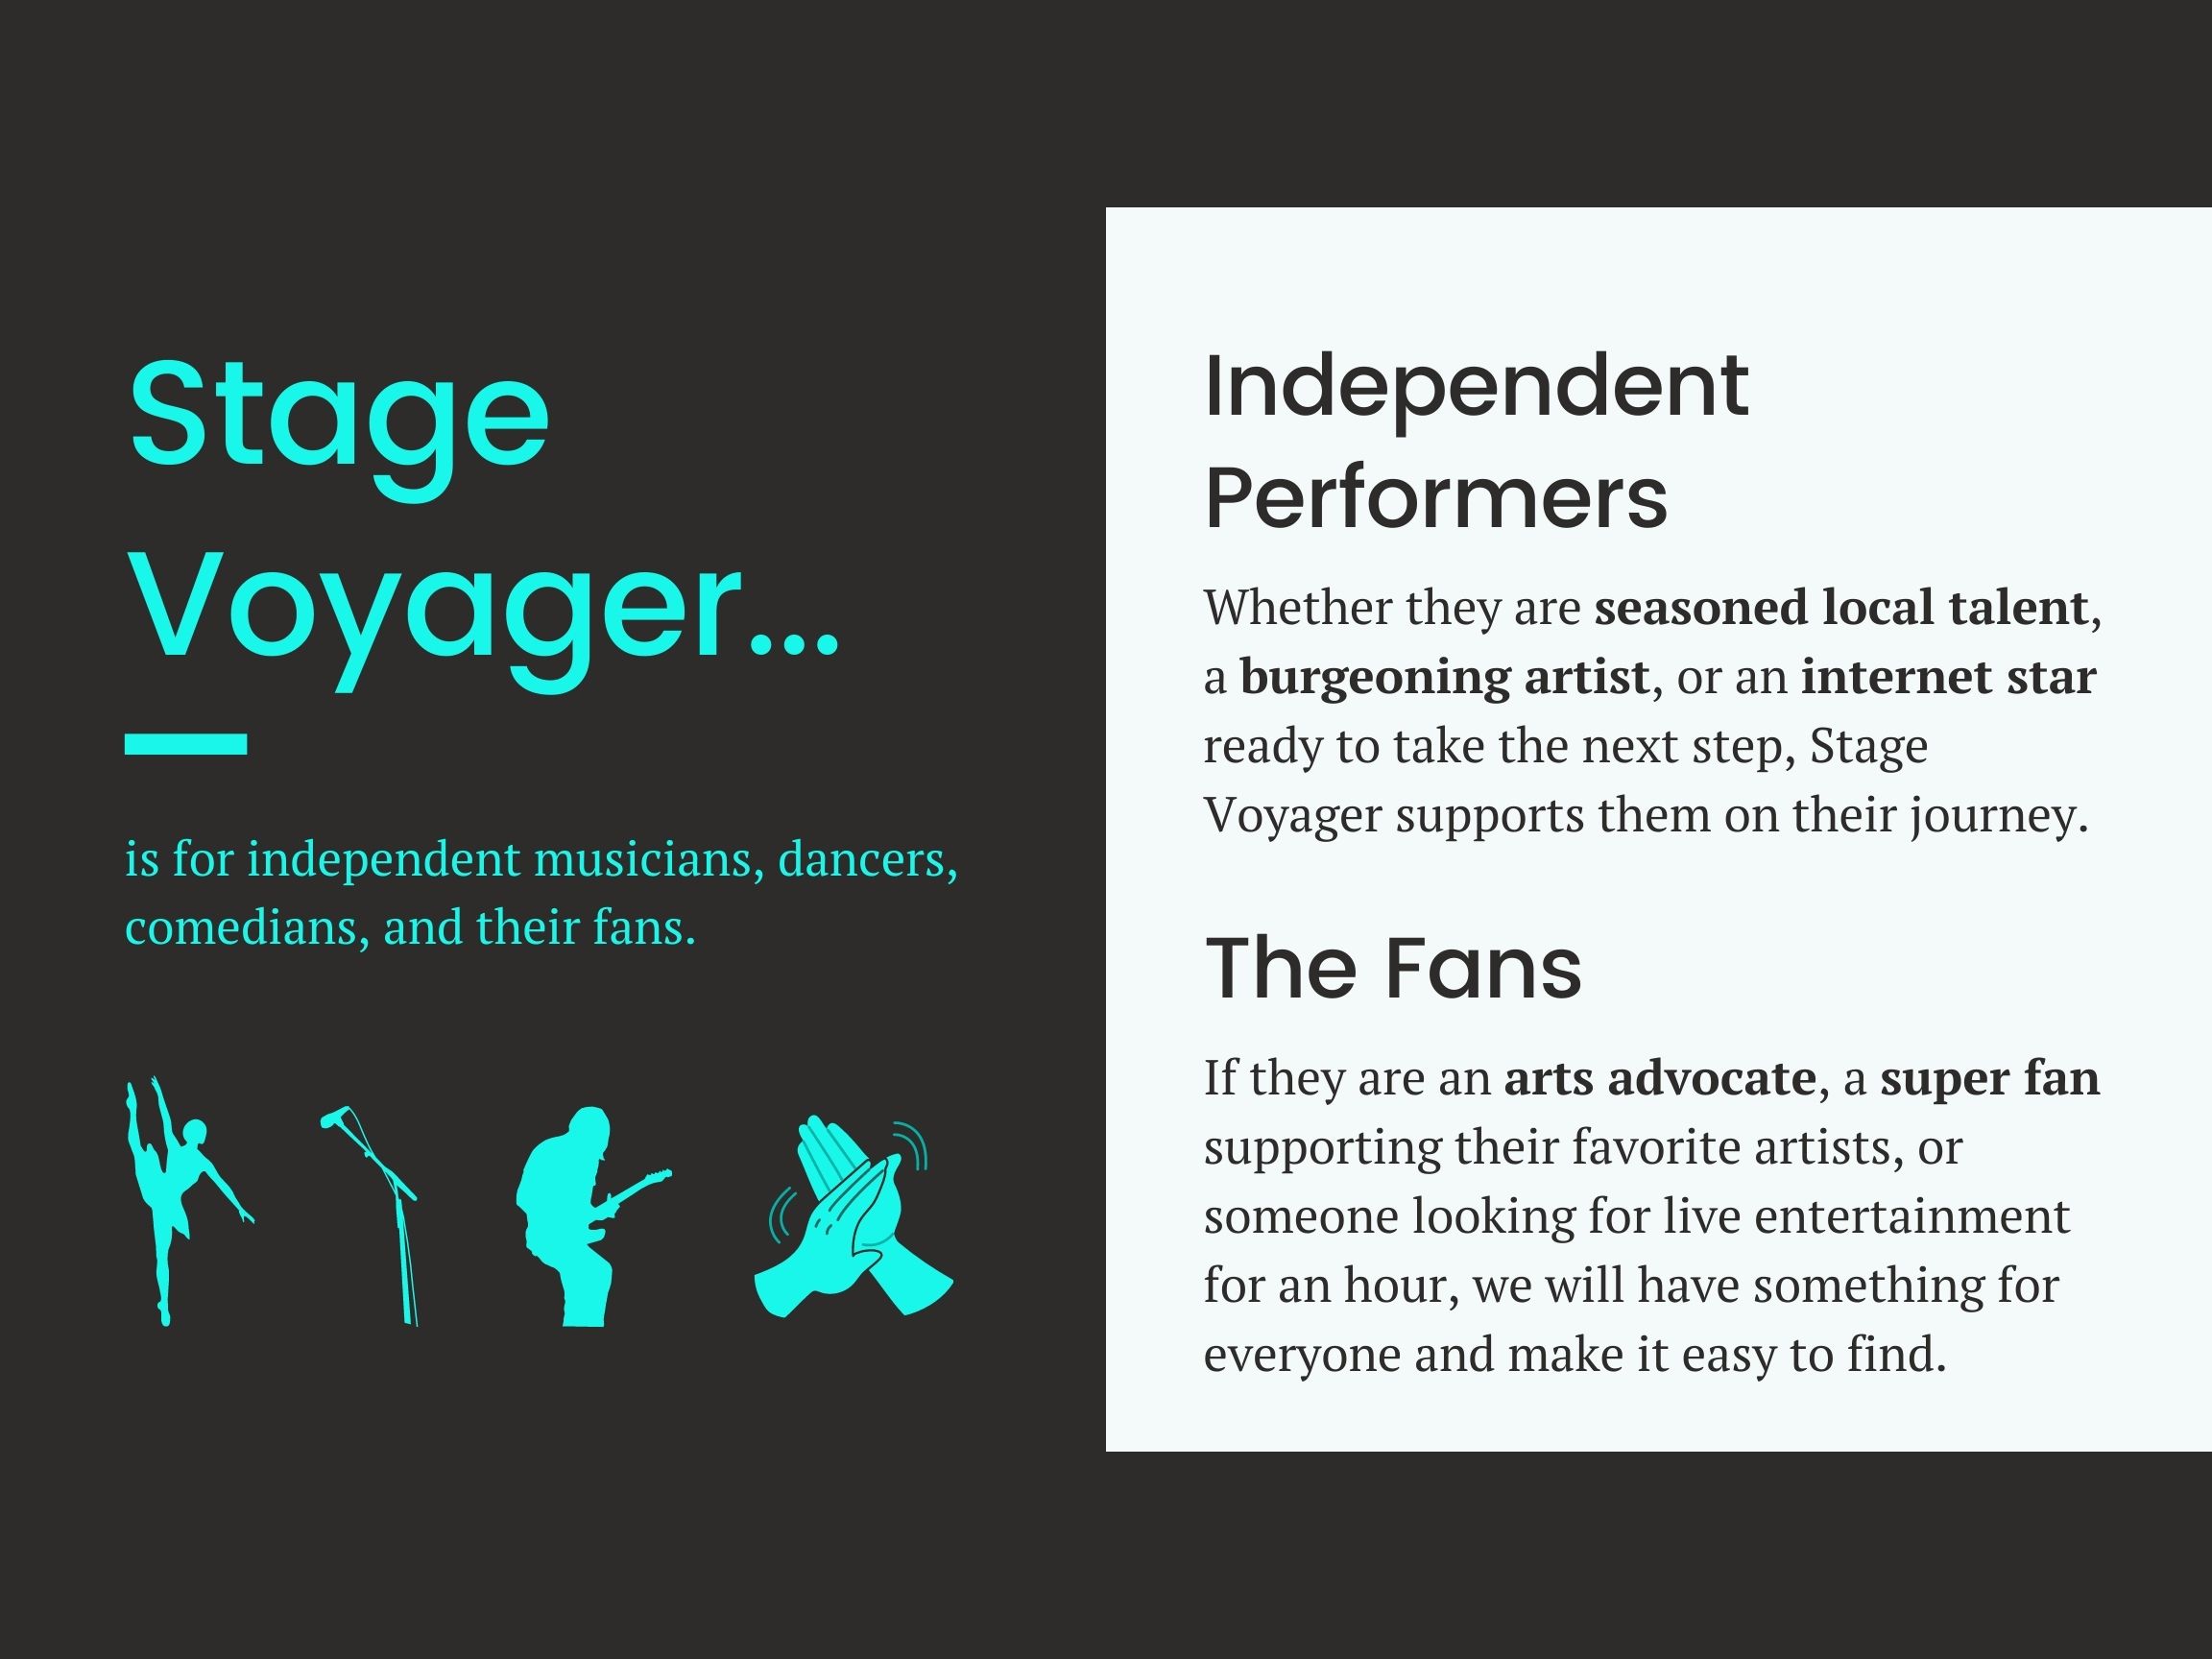 Stage Voyager Audience  Independent artists and their fans